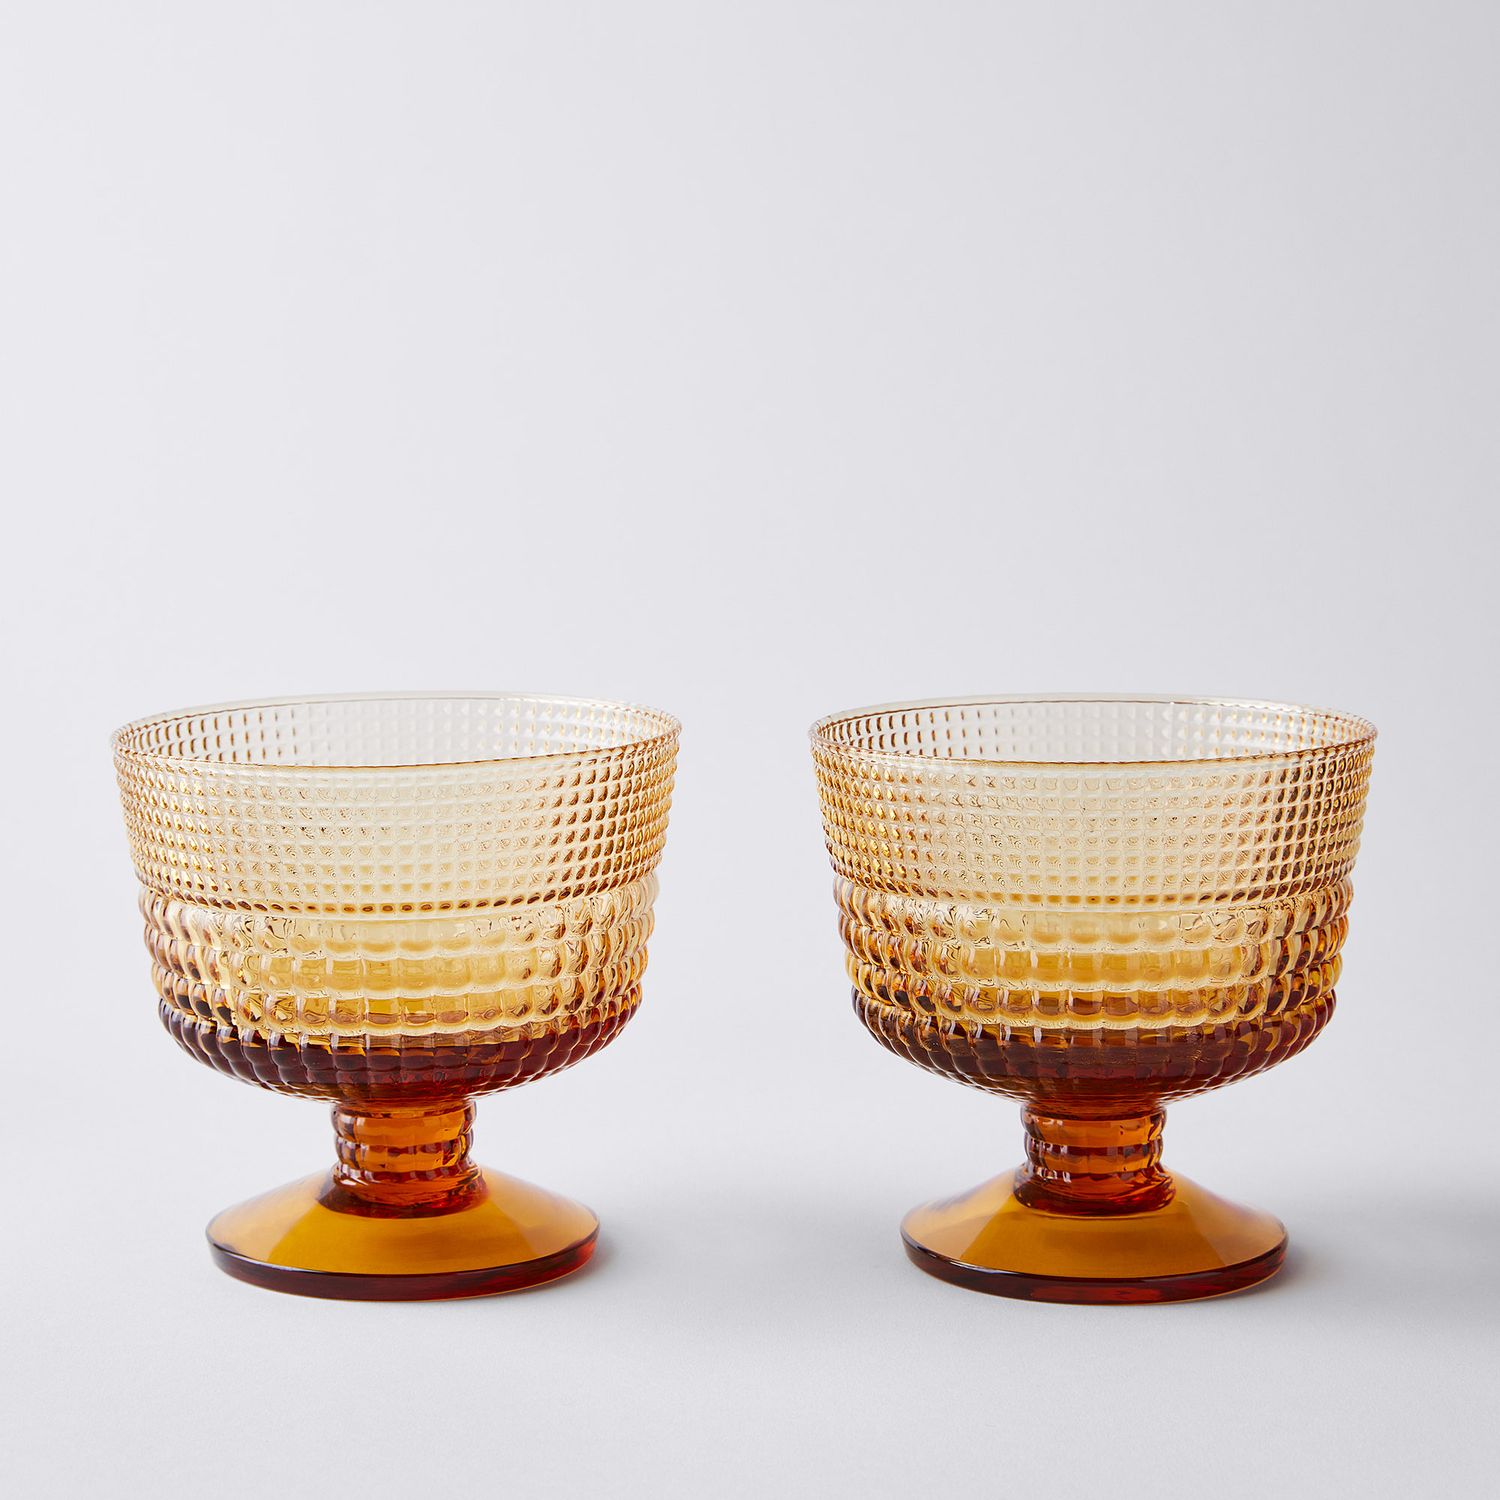 IVV Retro Italian Goblets, Set of 2, 6 Colors, Mouth-Blown Glass